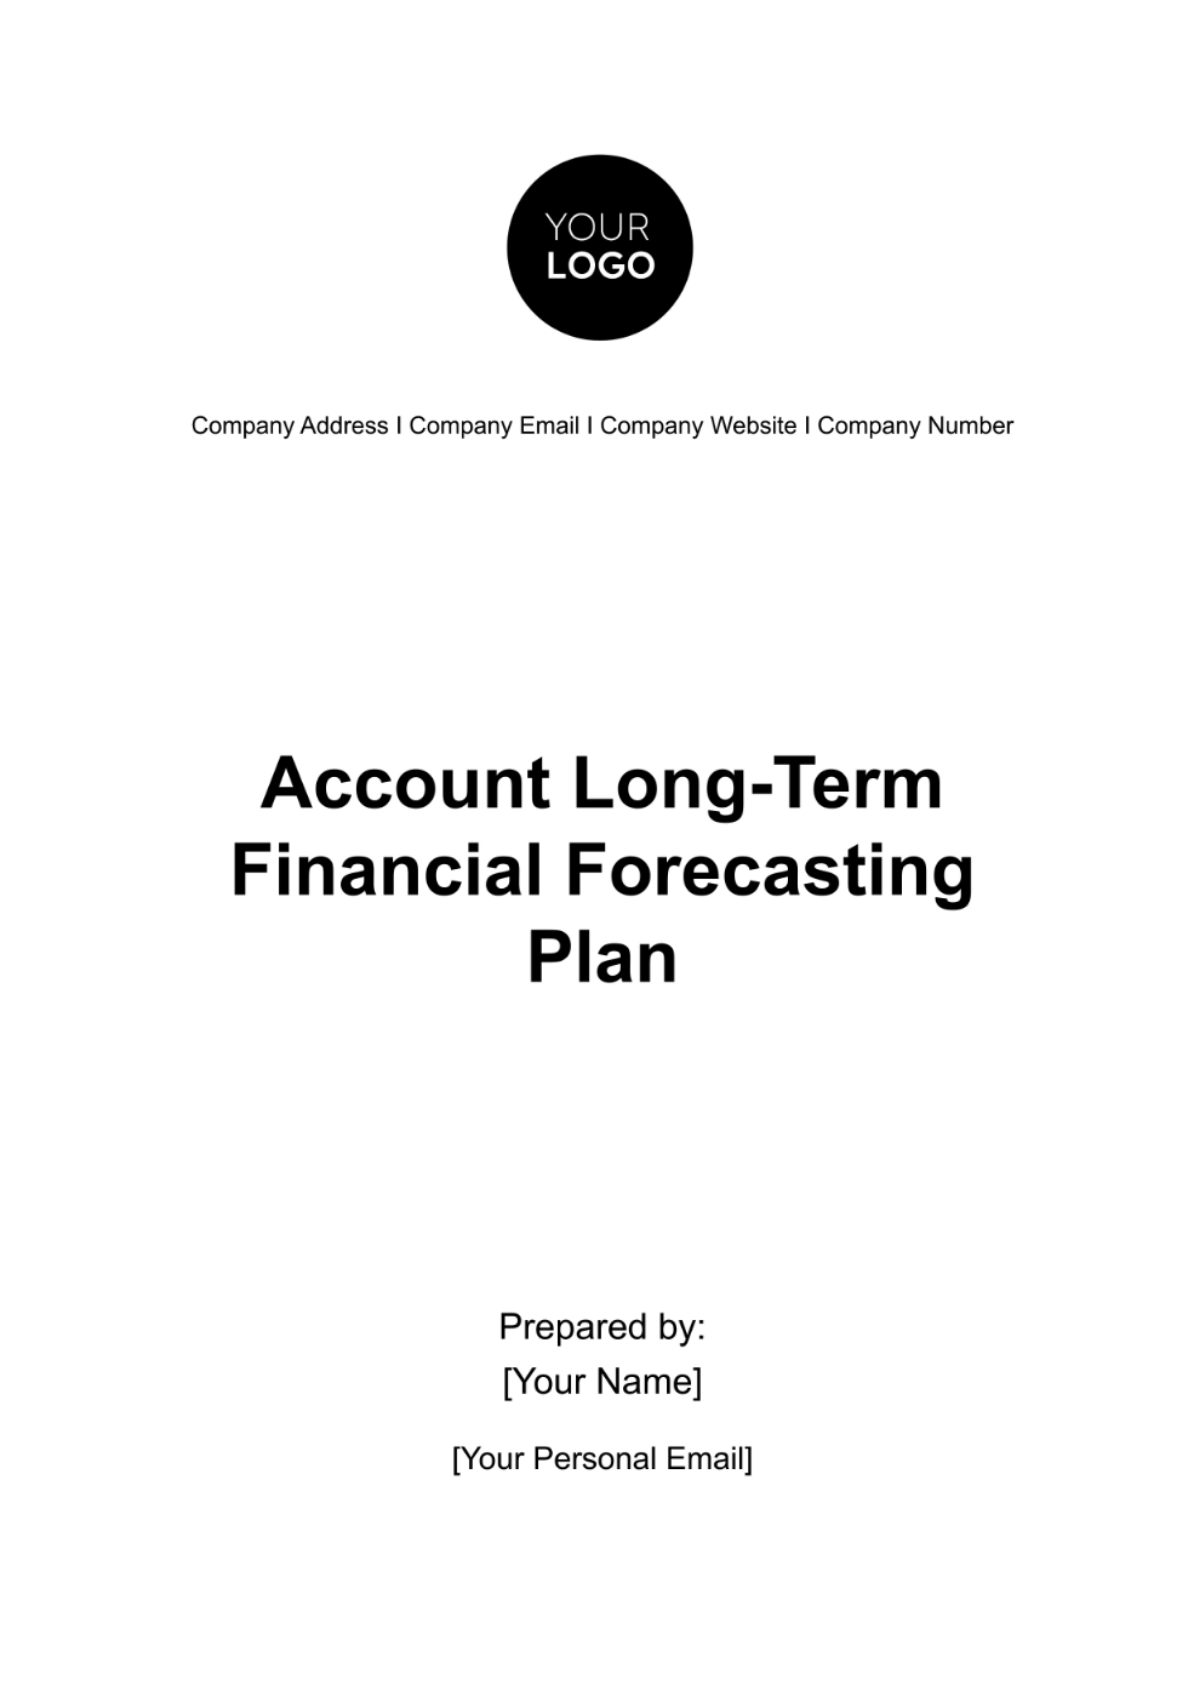 Account Long-Term Financial Forecasting Plan Template